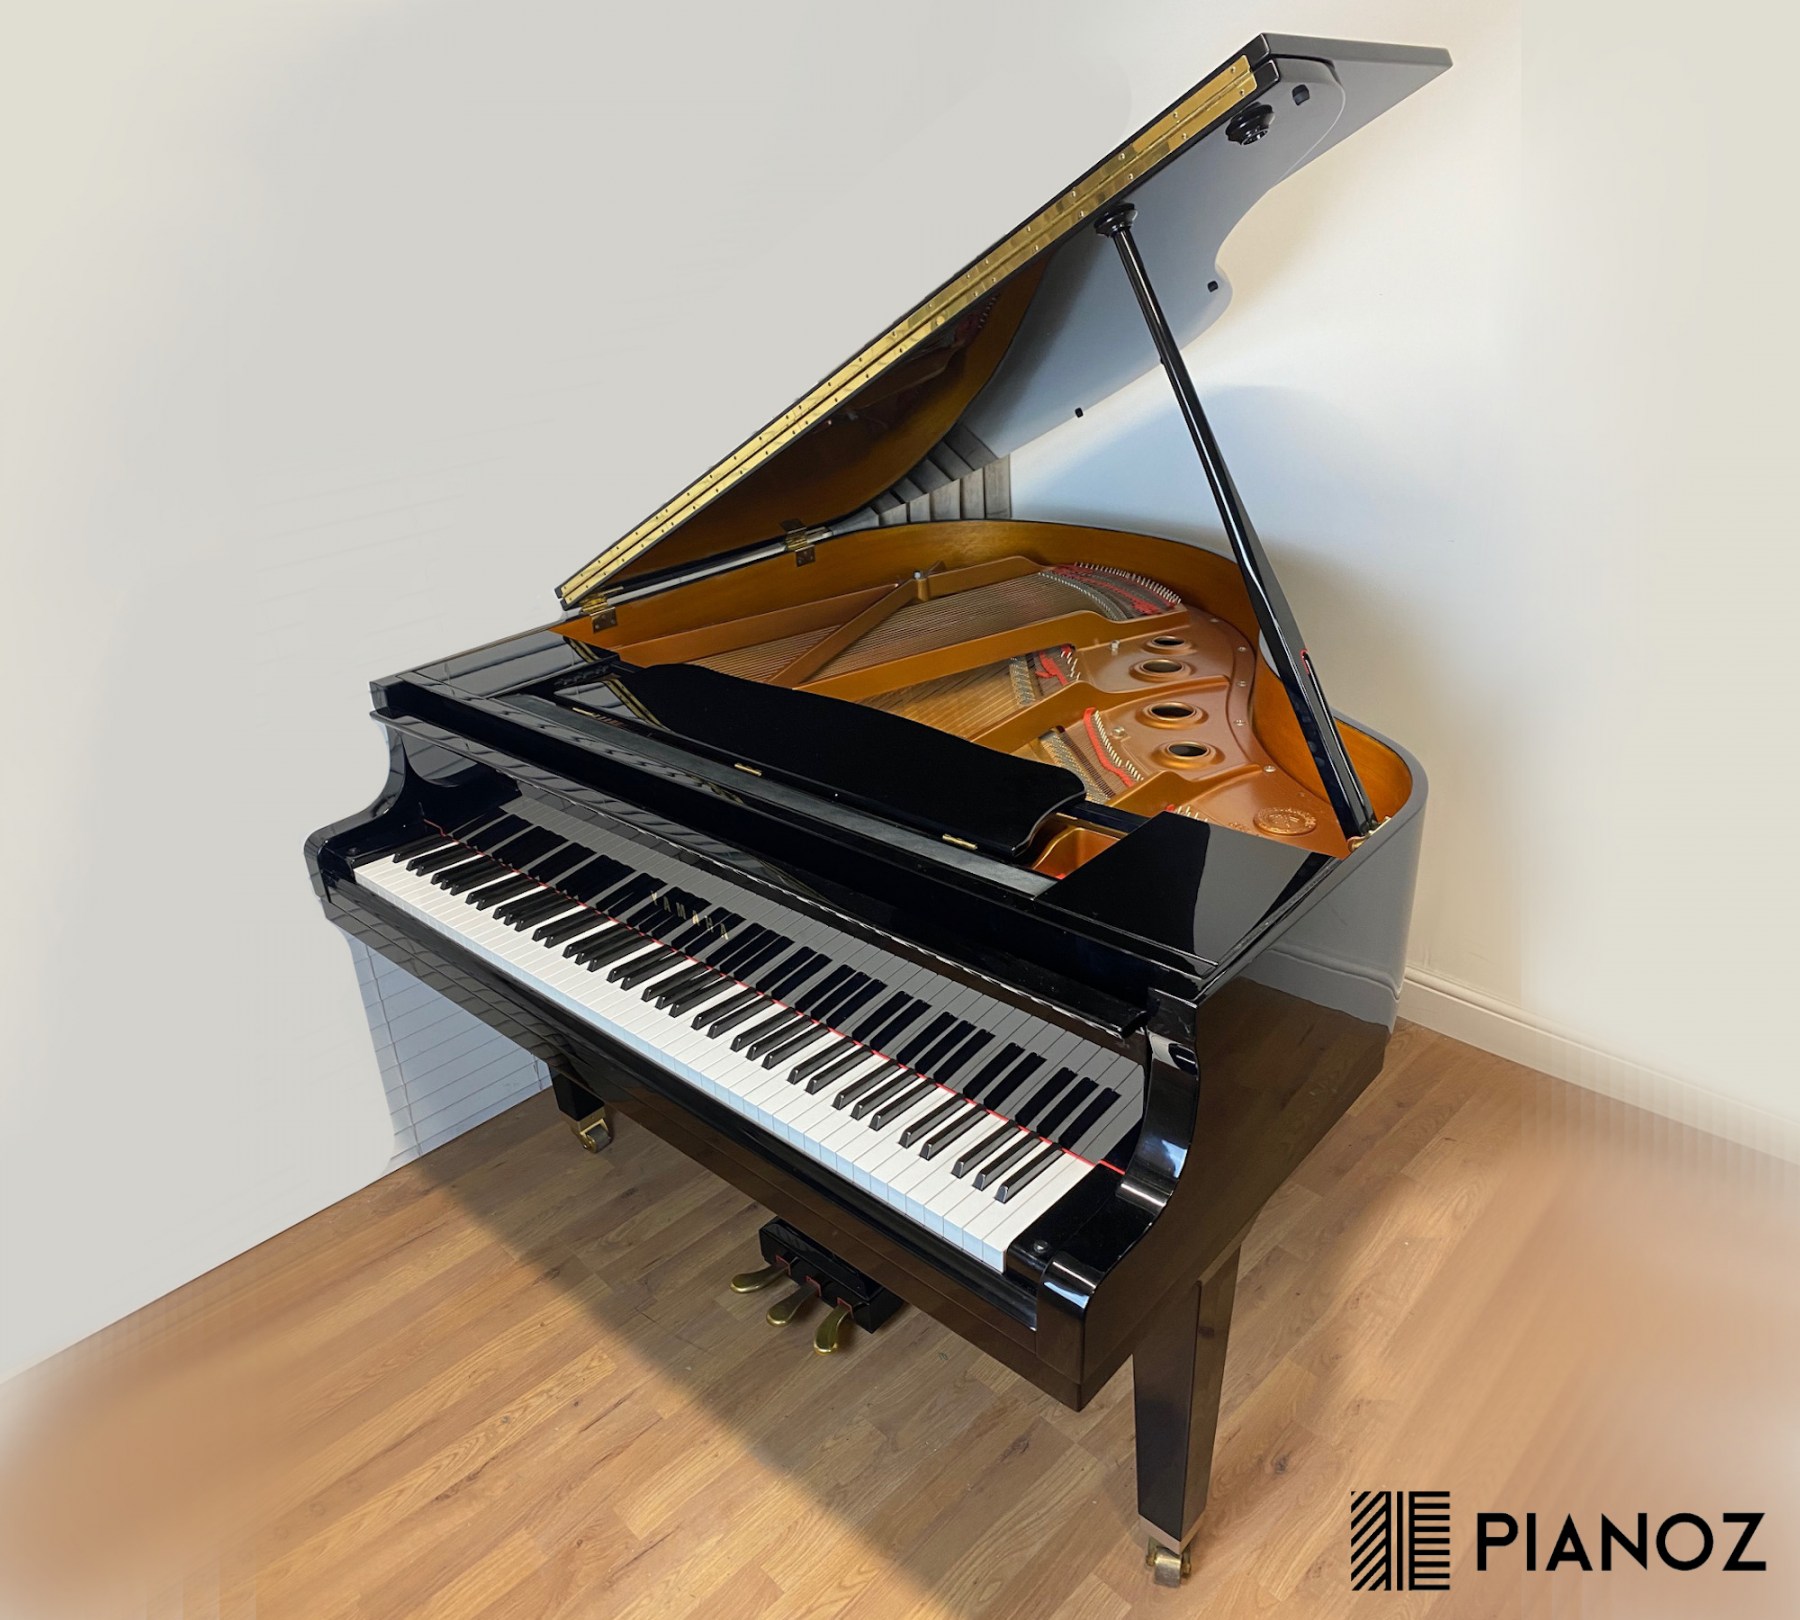 Yamaha GB1 Baby Grand Piano piano for sale in UK